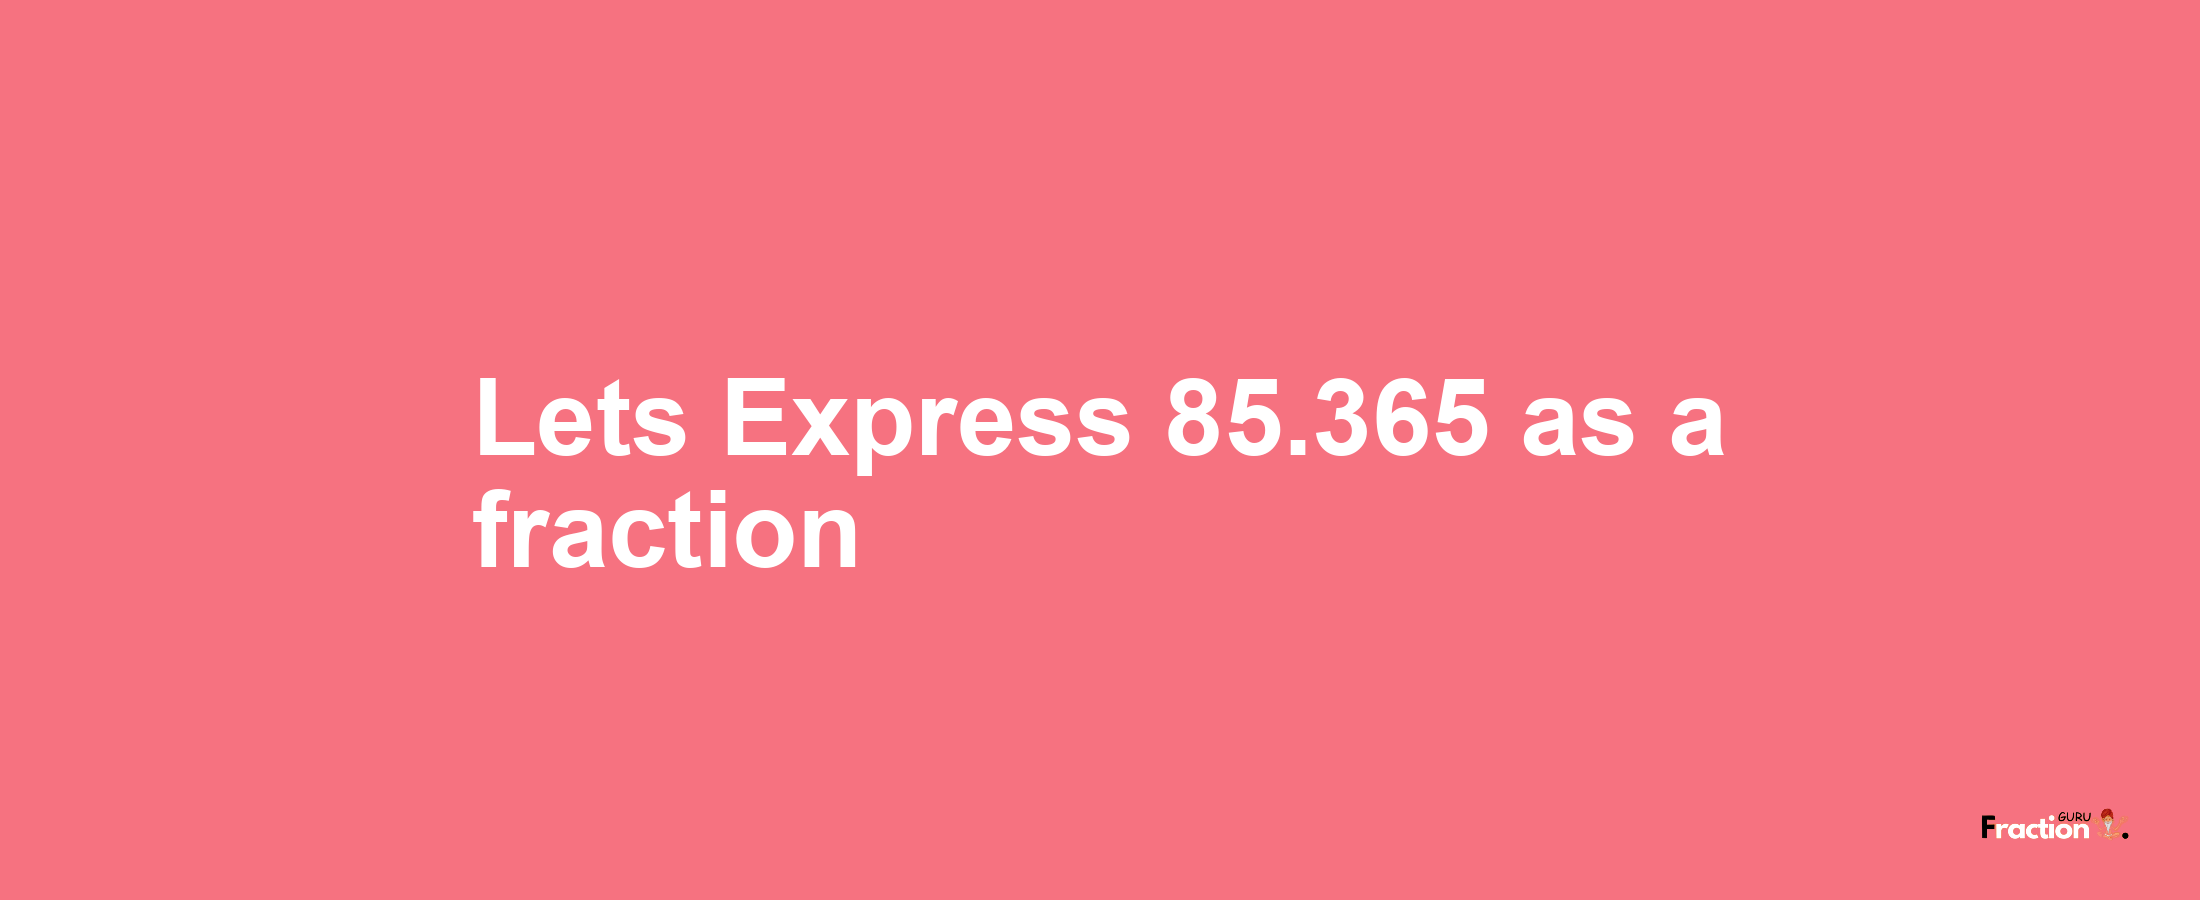 Lets Express 85.365 as afraction